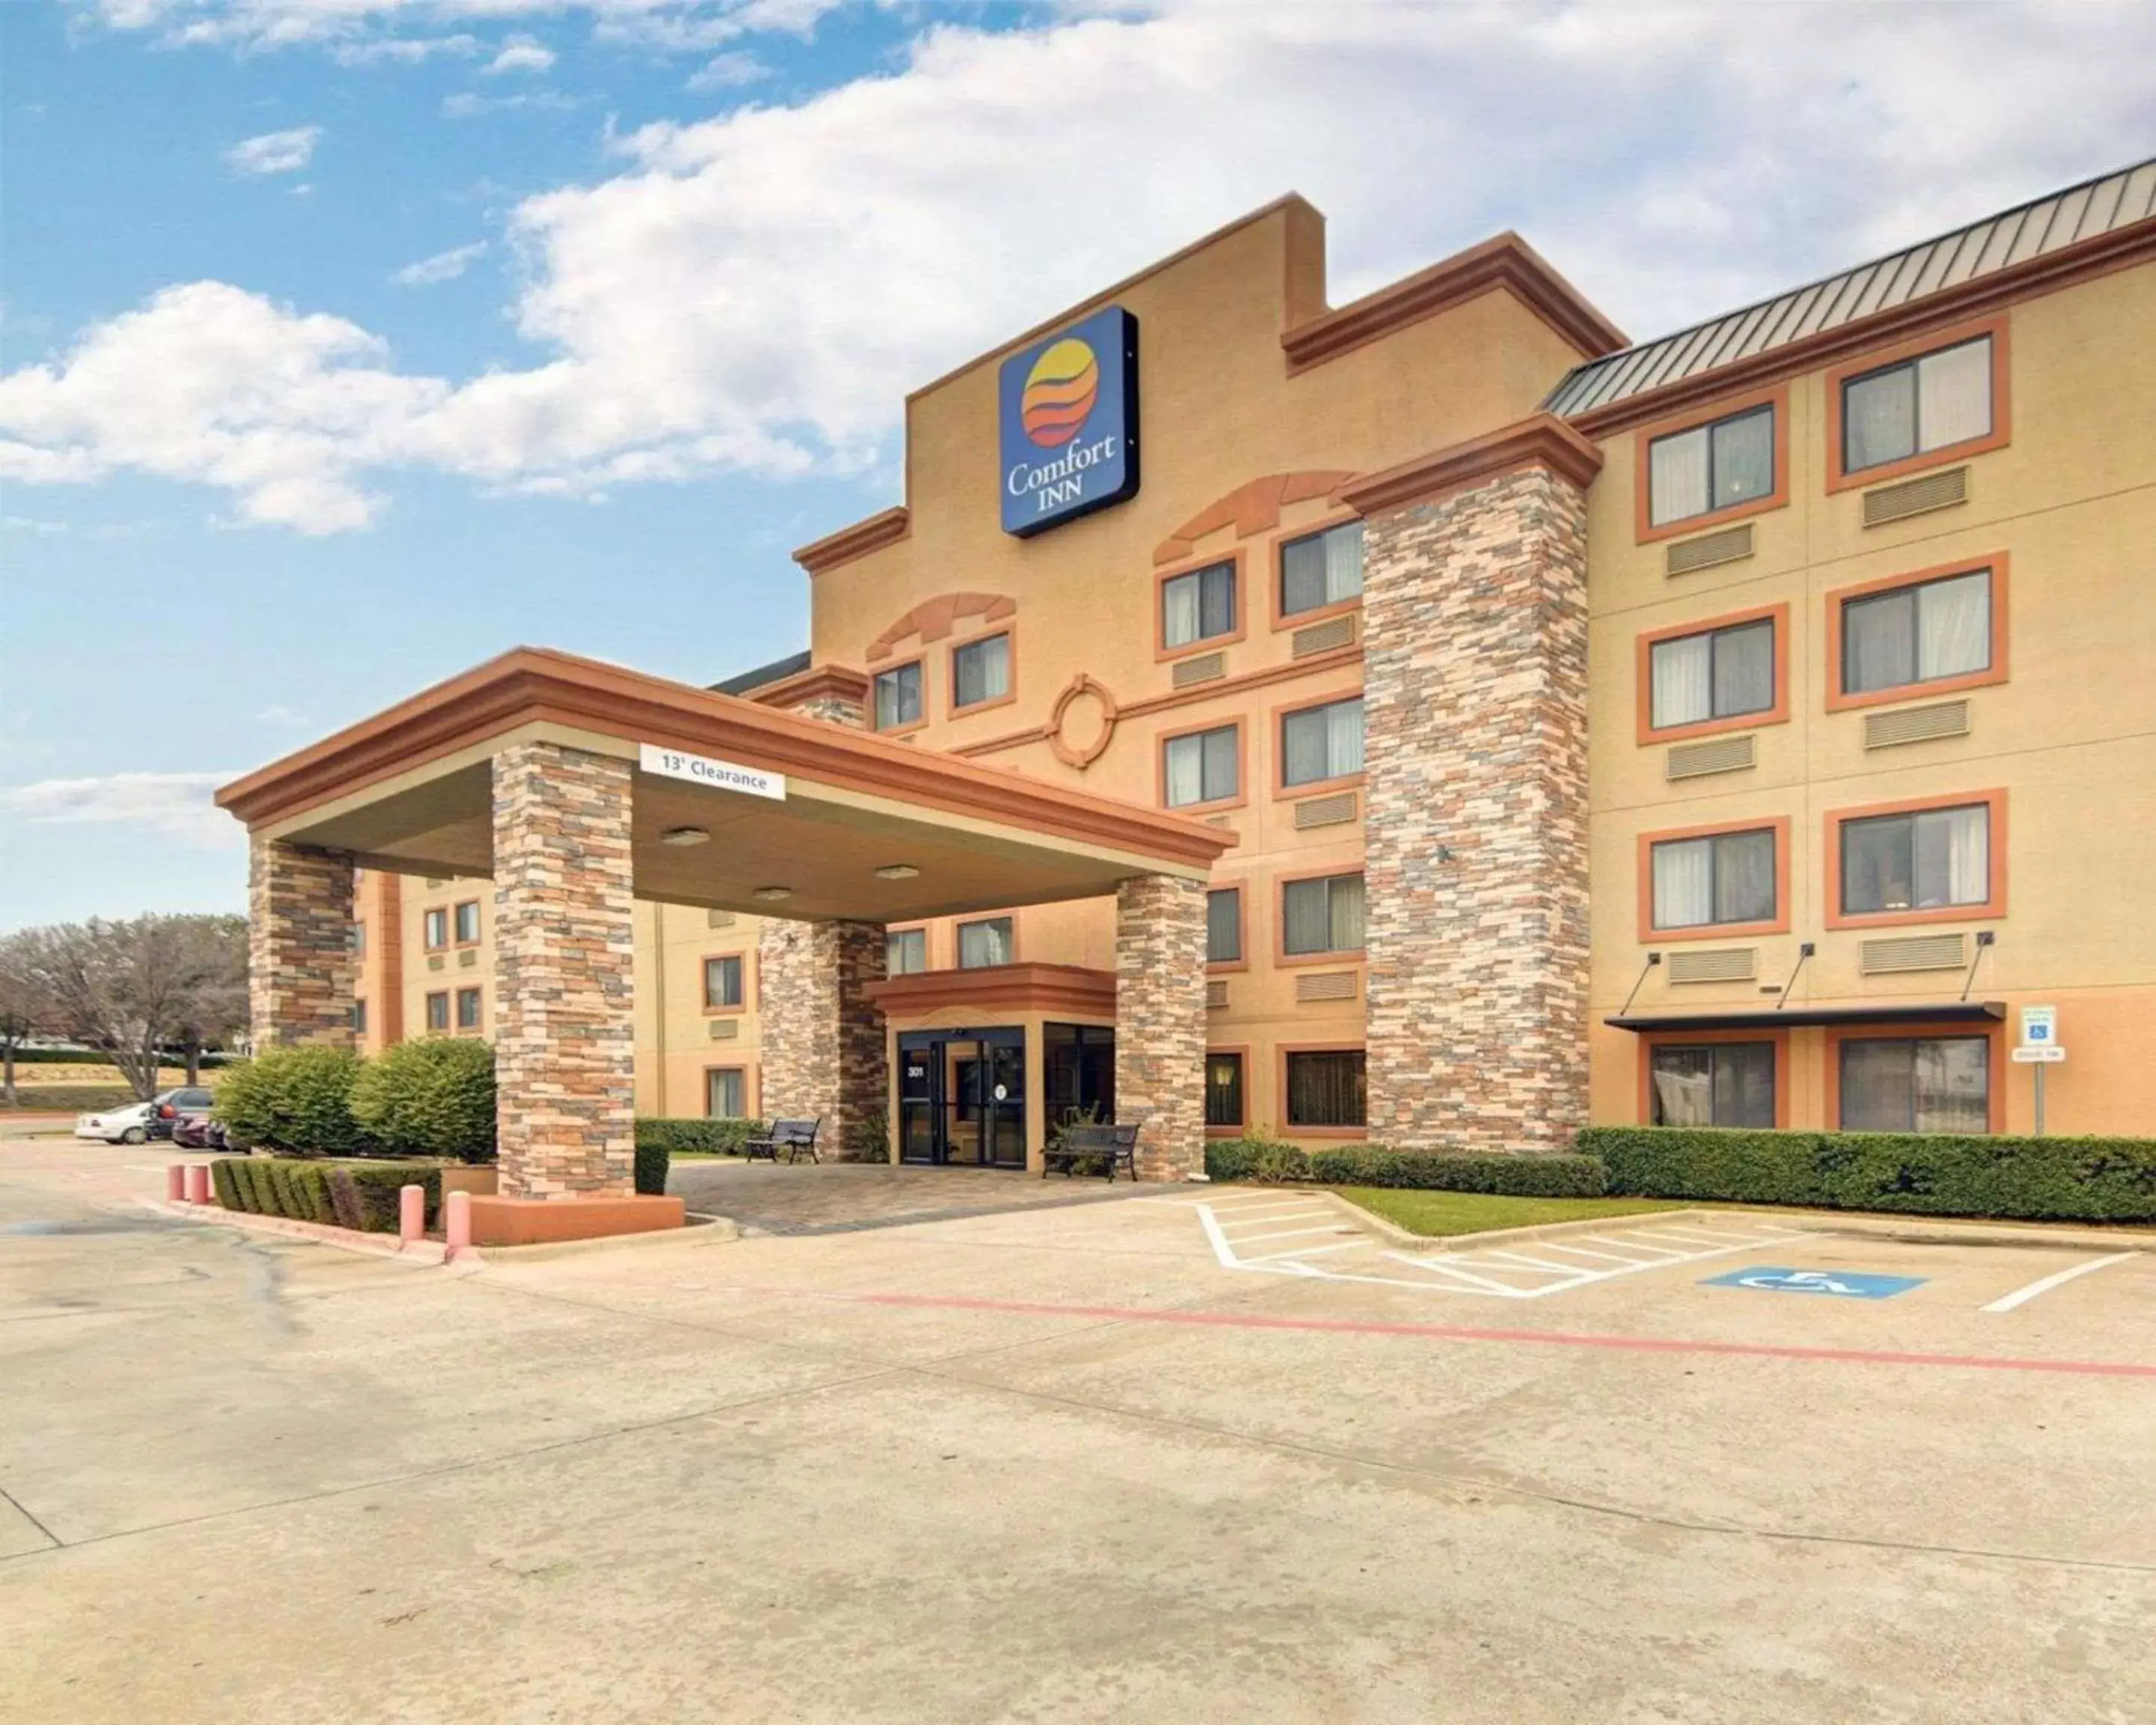 Property Building in Comfort Inn Grapevine Near DFW Airport